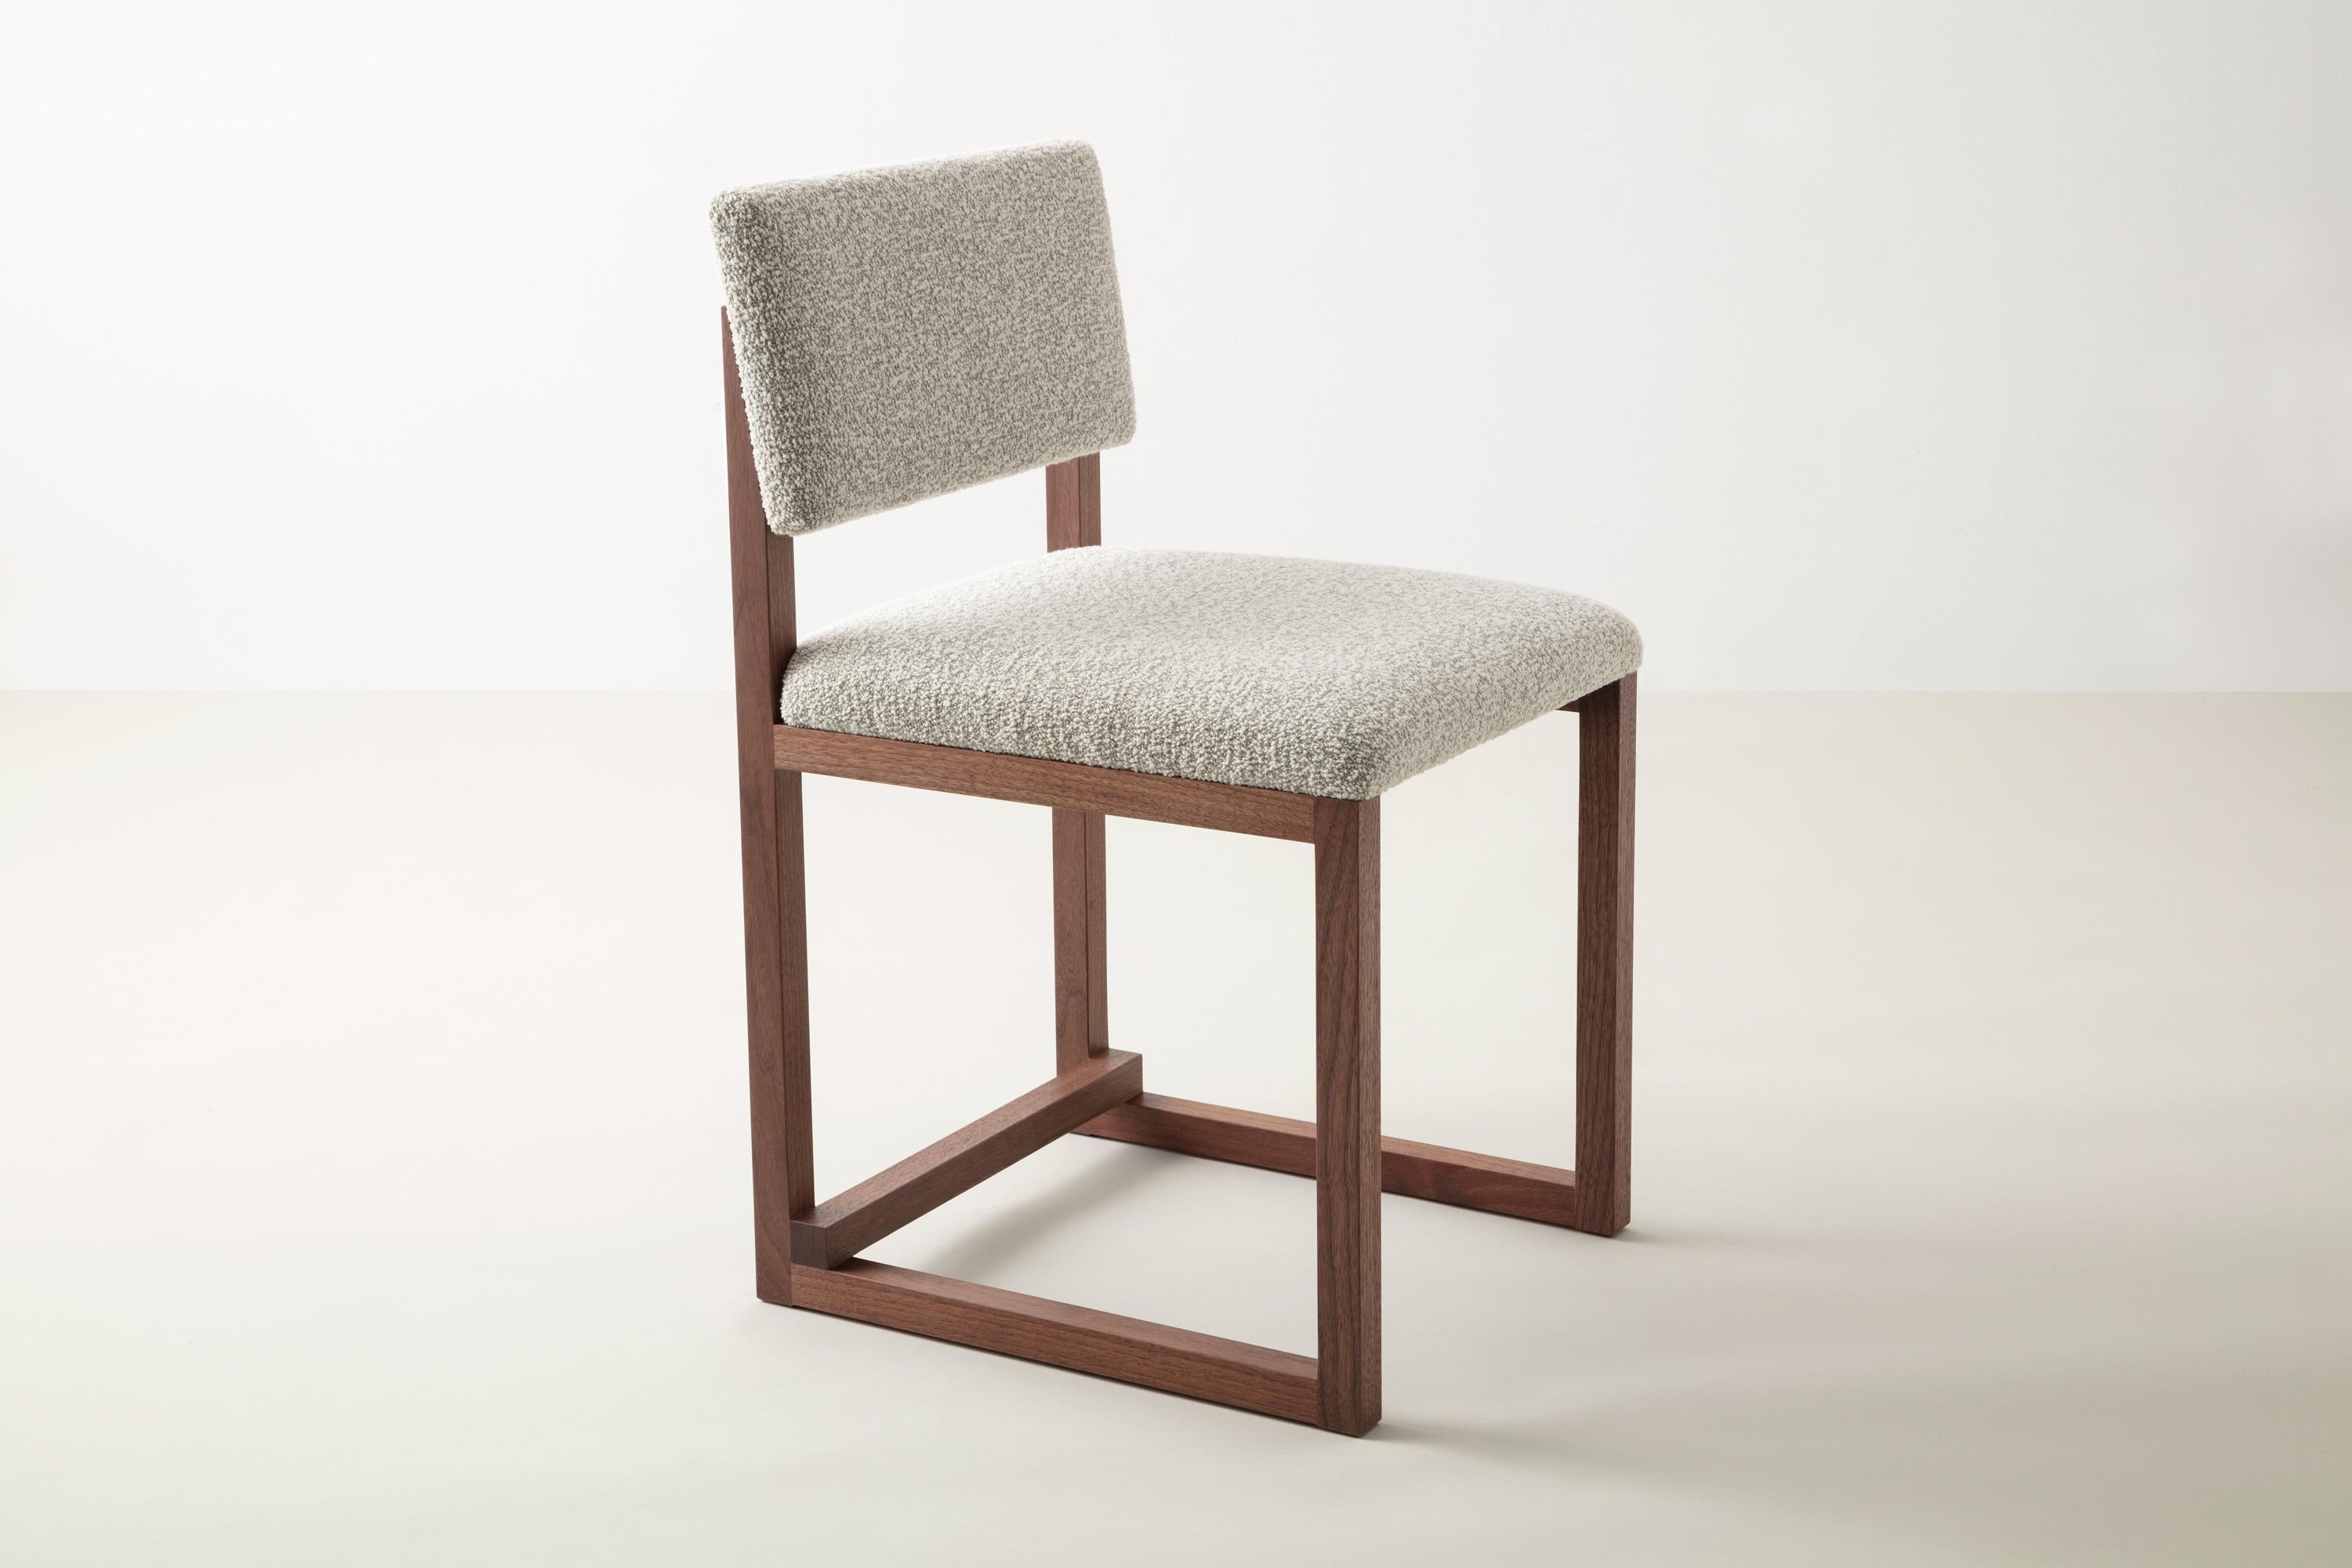 Shown in solid walnut, bouclé wool, and brushed brass hardware
 
Available with:
Wood in ash, cherry, maple, walnut, or white oak 
special edition ebonized ash and white washed ash upon custom request 

Upholstery in customer’s own material or